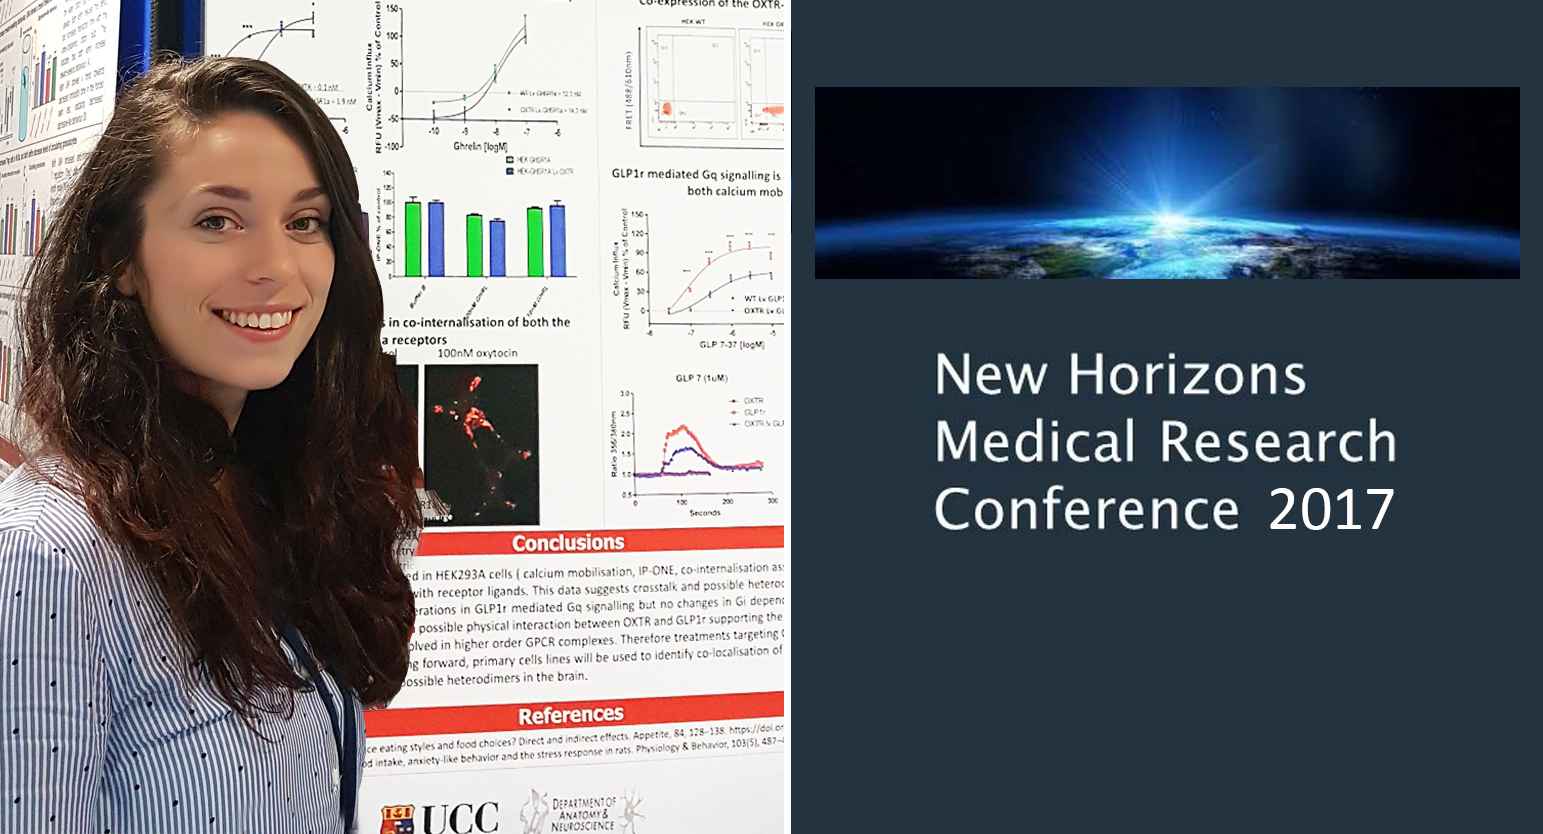 Shauna Wallace-Fitzsimons awarded poster prize at New Horizons Conference